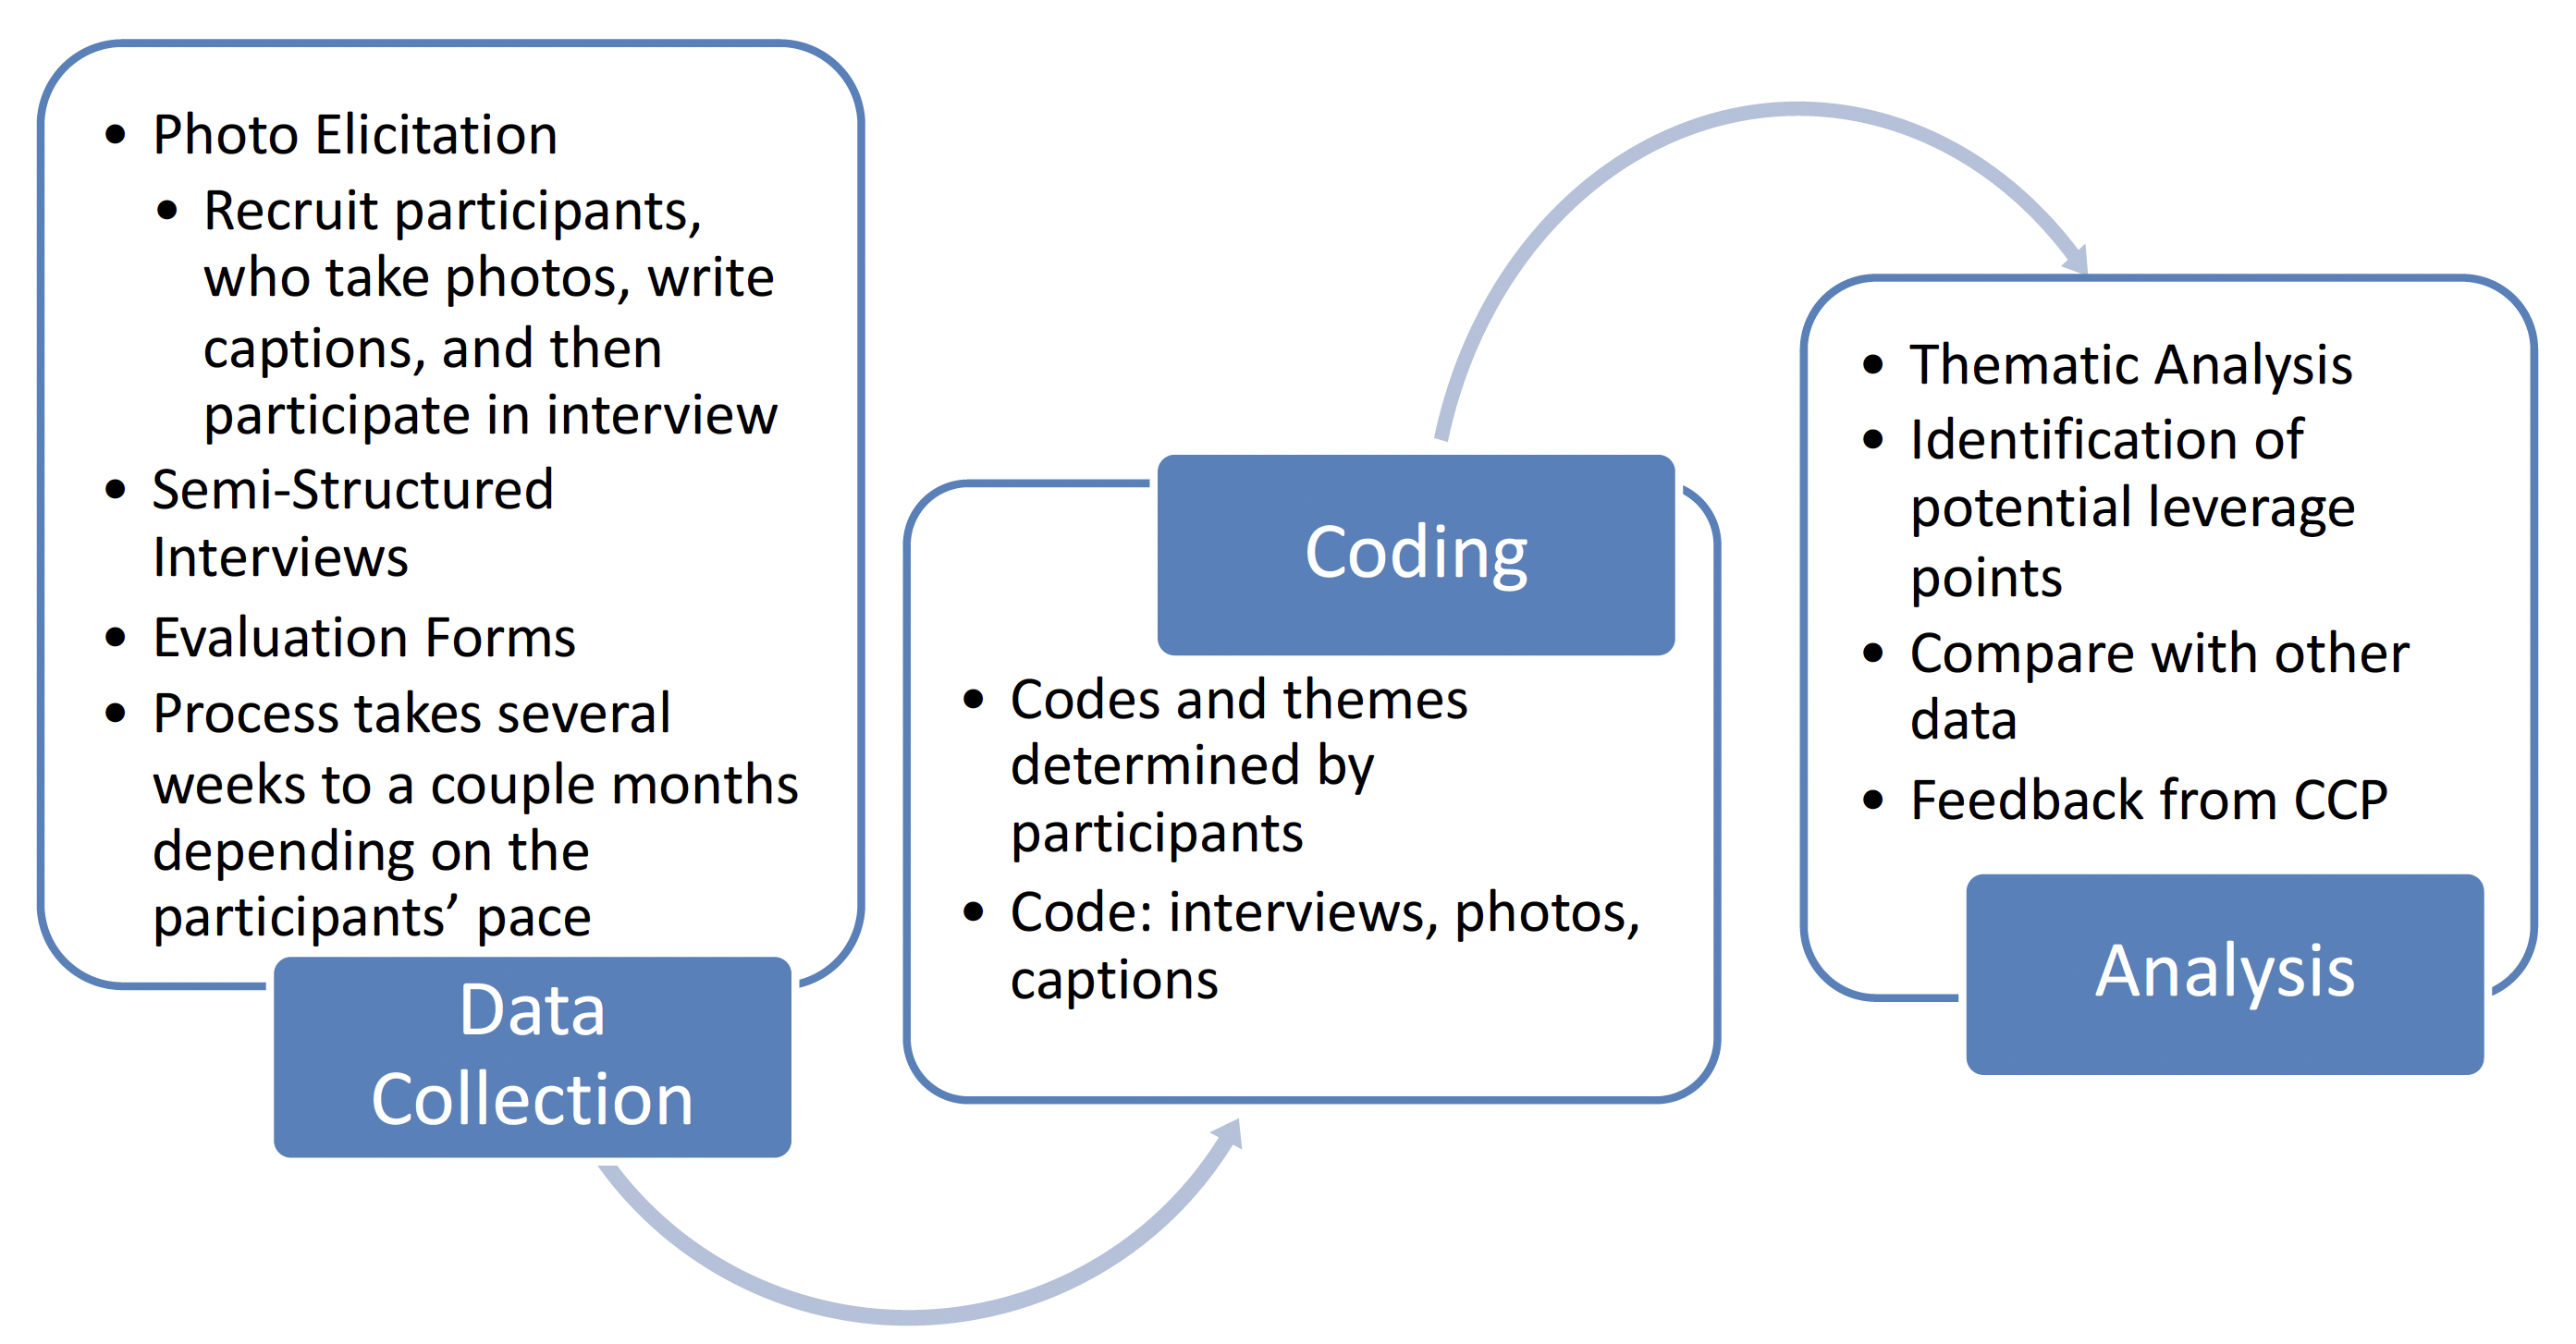 This diagram outlines the process for data collection, coding, and analysis for this photo project.